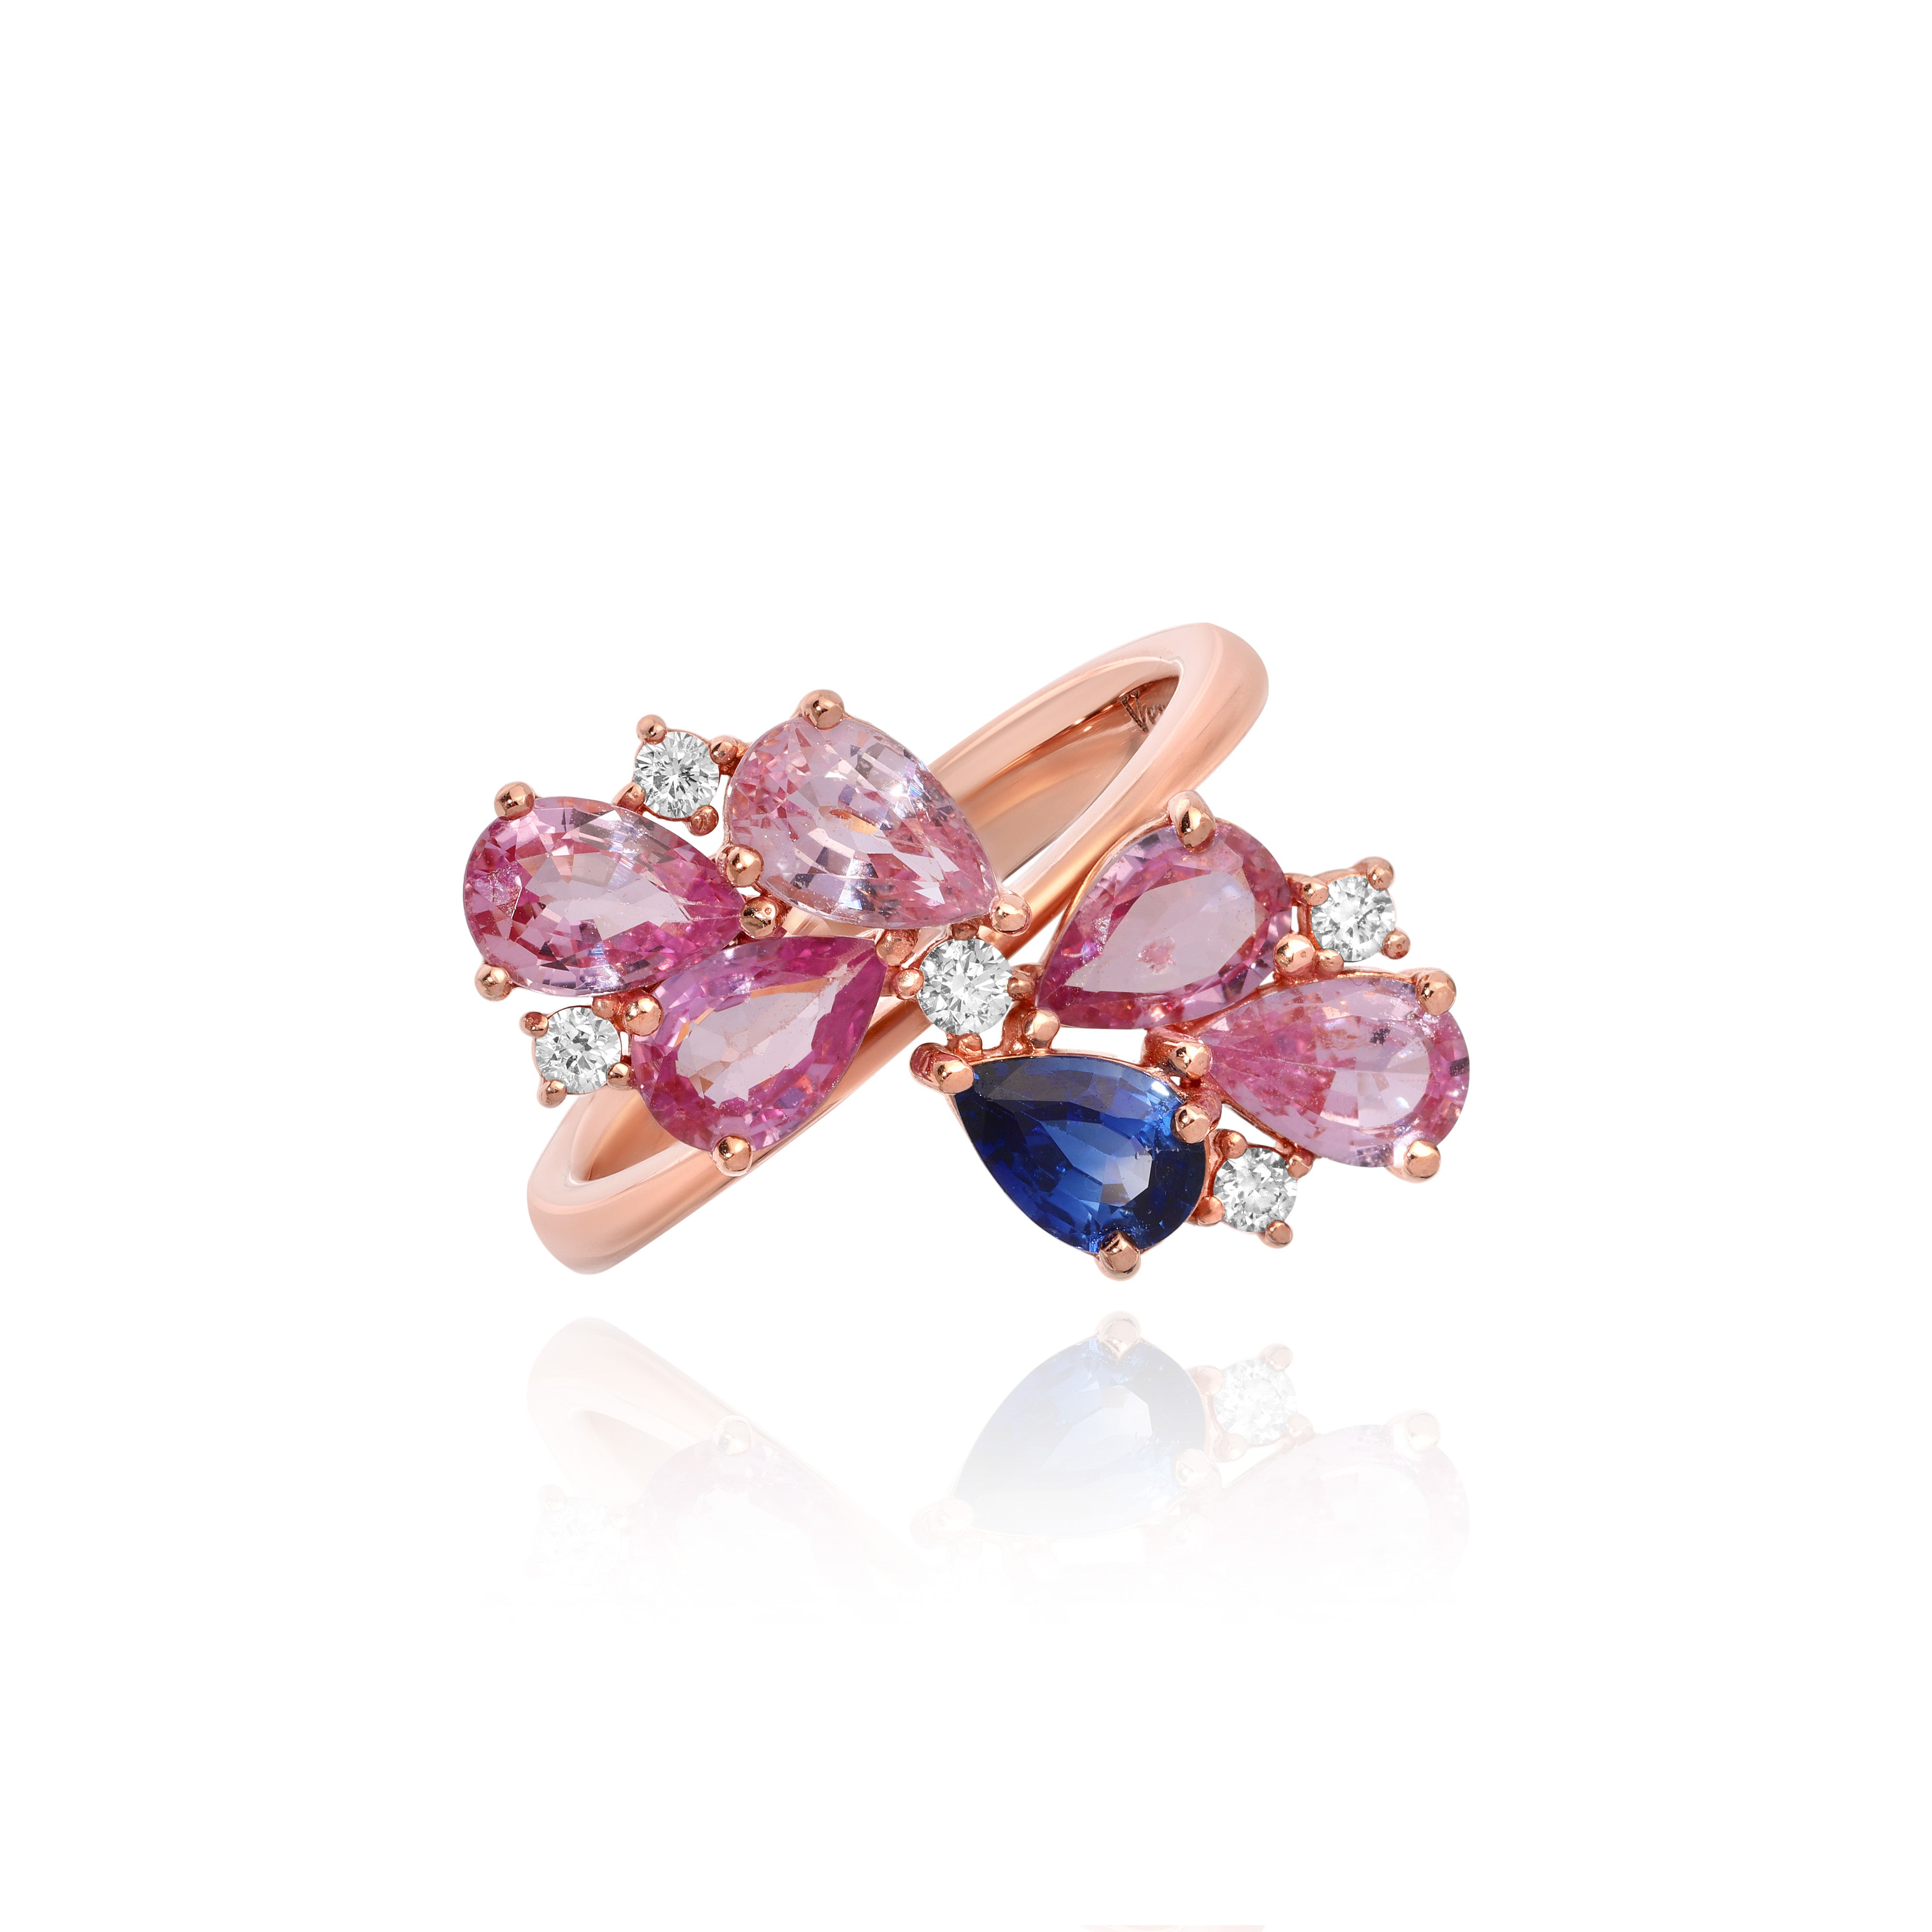 Rose Gold Ring with pear shaped Pink Sapphires and a Blue Sapphire, and small round Diamonds, Medium